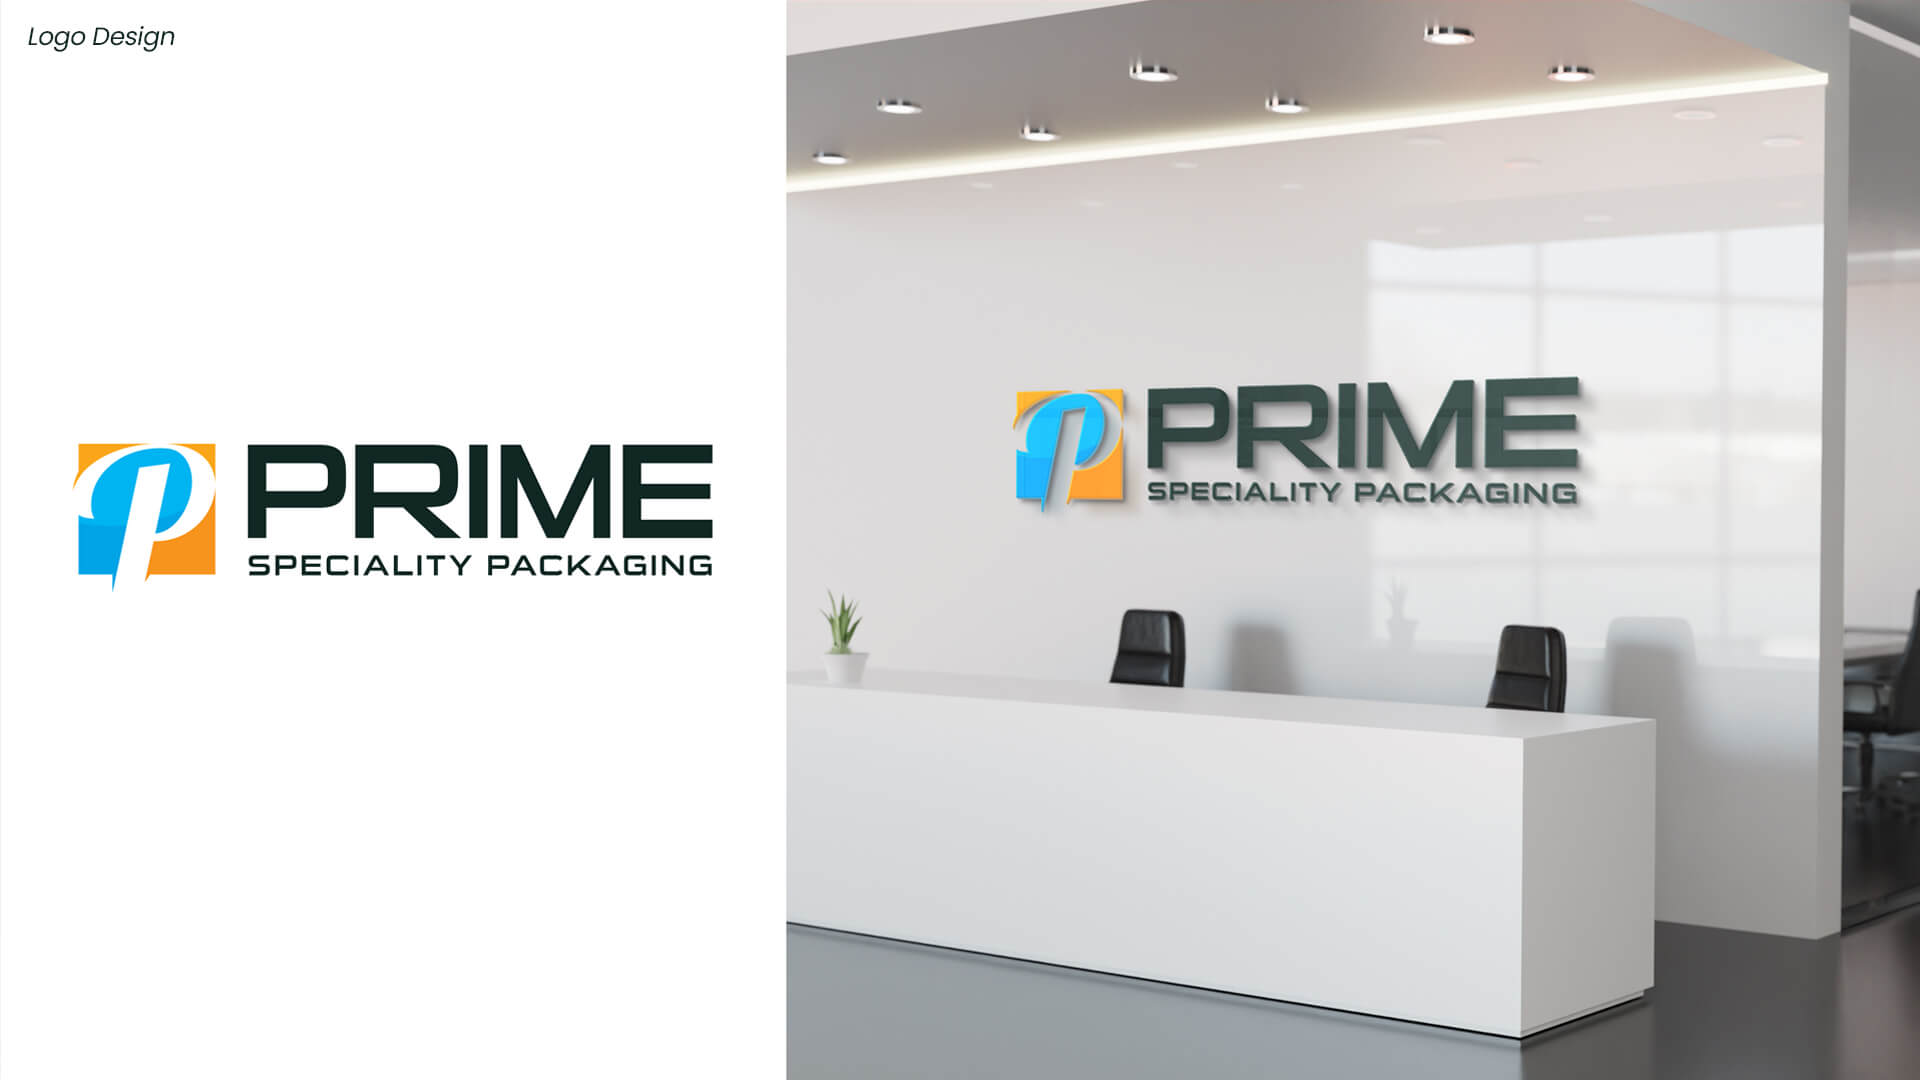 Prime Speciality Packaging 1